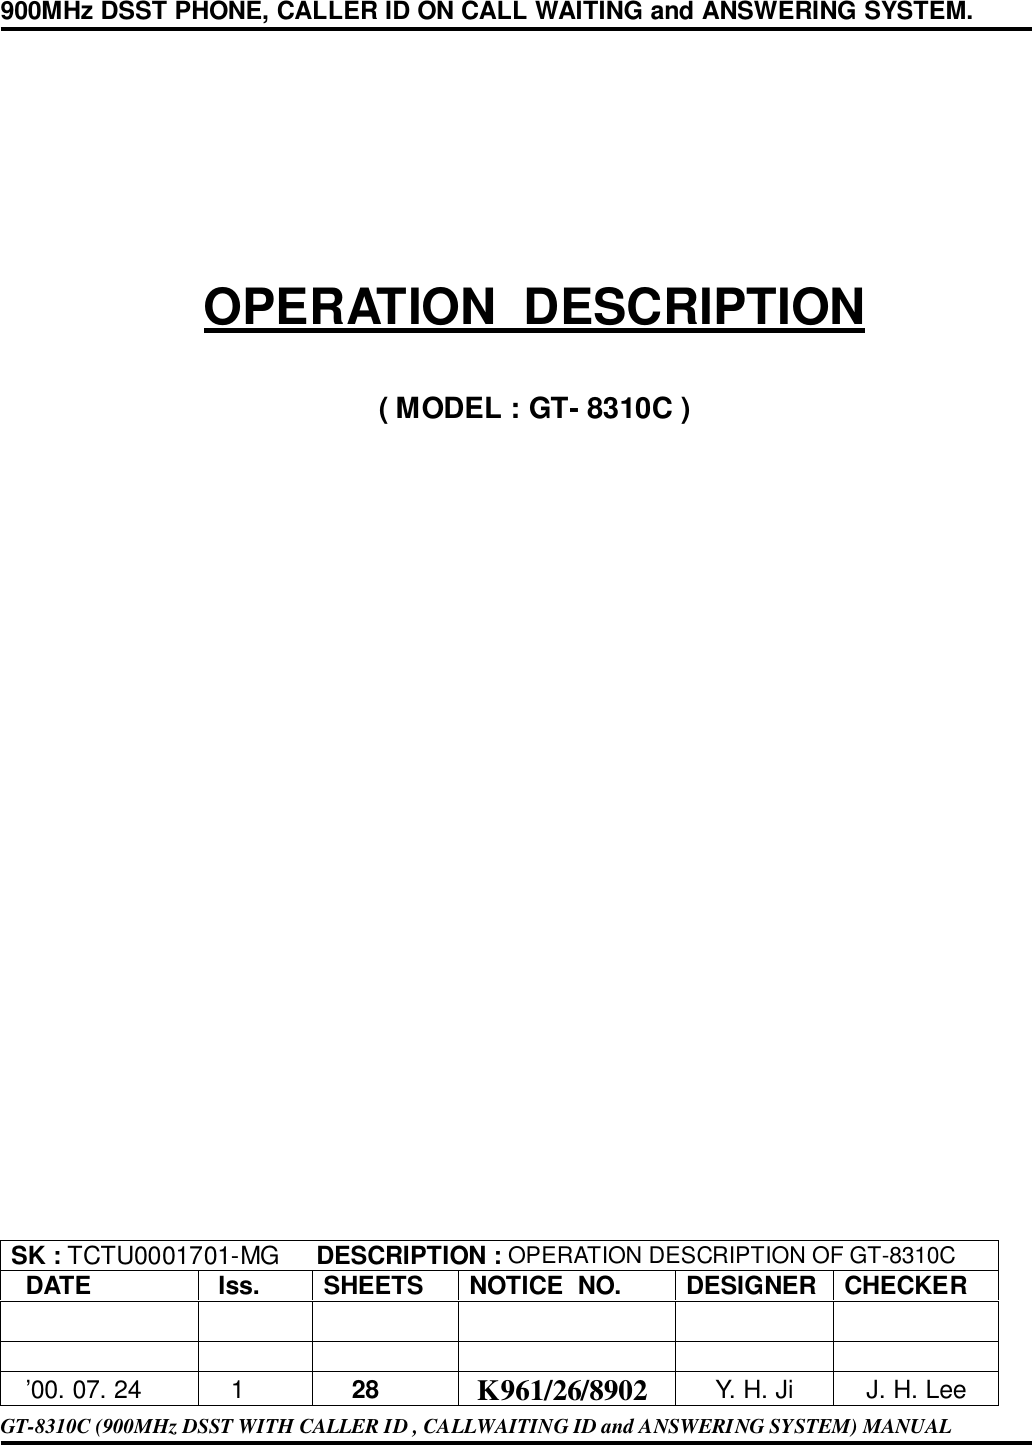 900MHz DSST PHONE, CALLER ID ON CALL WAITING and ANSWERING SYSTEM.OPERATION  DESCRIPTION( MODEL : GT- 8310C )SK : TCTU0001701-MG     DESCRIPTION : OPERATION DESCRIPTION OF GT-8310C  DATE  Iss. SHEETS NOTICE  NO. DESIGNER CHECKER  ’00. 07. 24    1    28  K961/26/8902 Y. H. Ji J. H. LeeGT-8310C (900MHz DSST WITH CALLER ID , CALLWAITING ID and ANSWERING SYSTEM) MANUAL